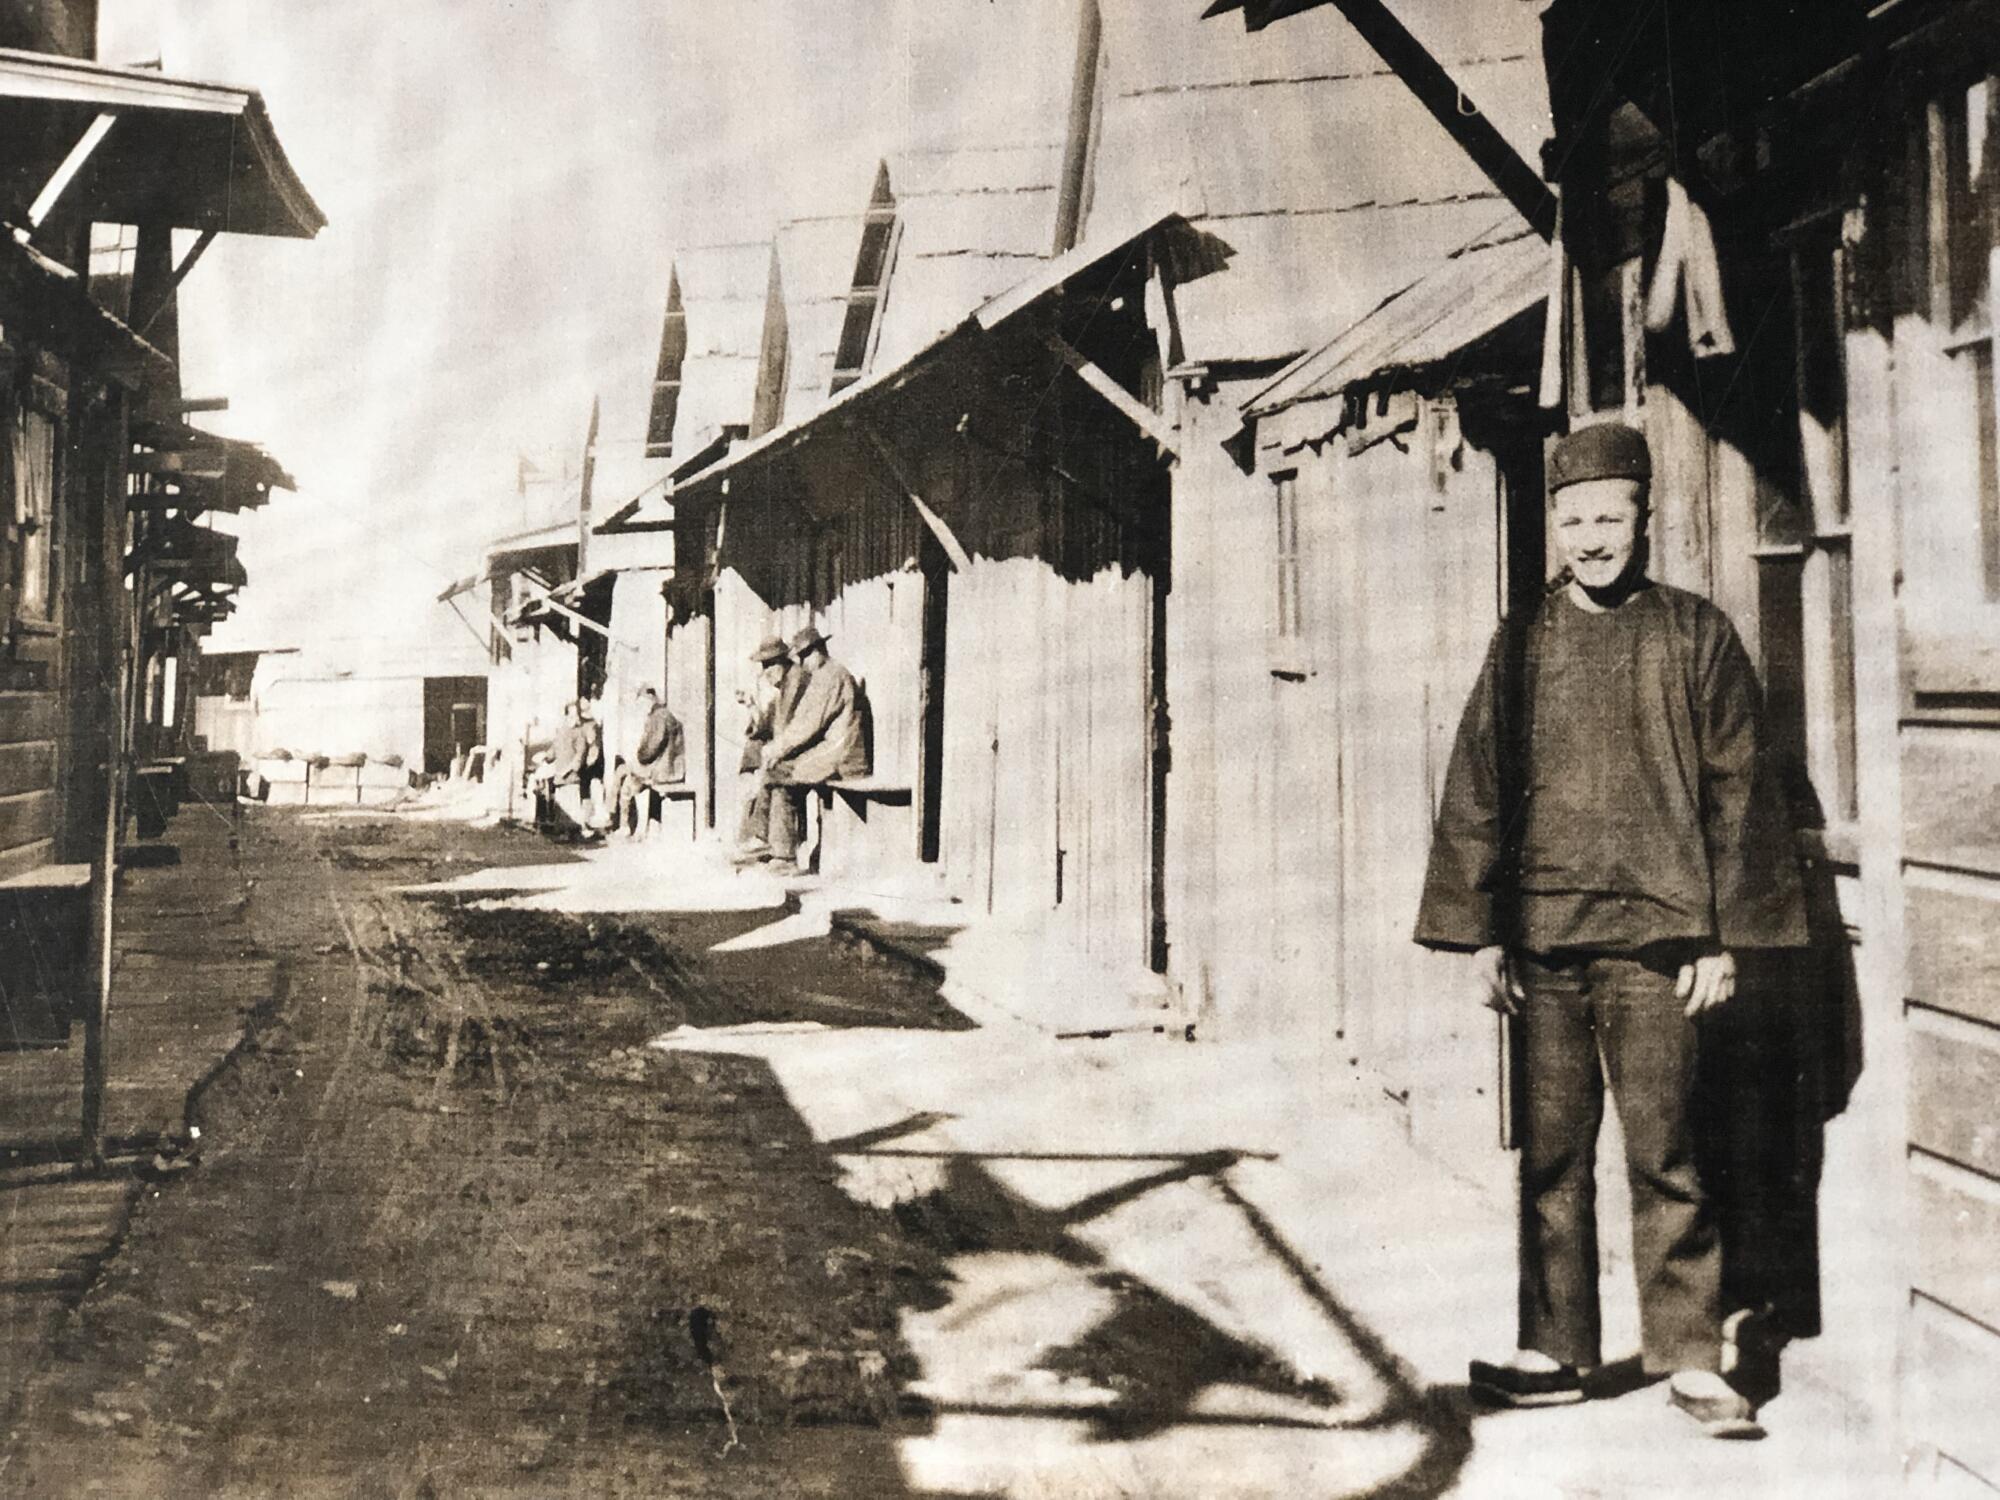 A black-and-white photo of a man in Chinese street clothes standing as others sit out front of a row of wooden houses.